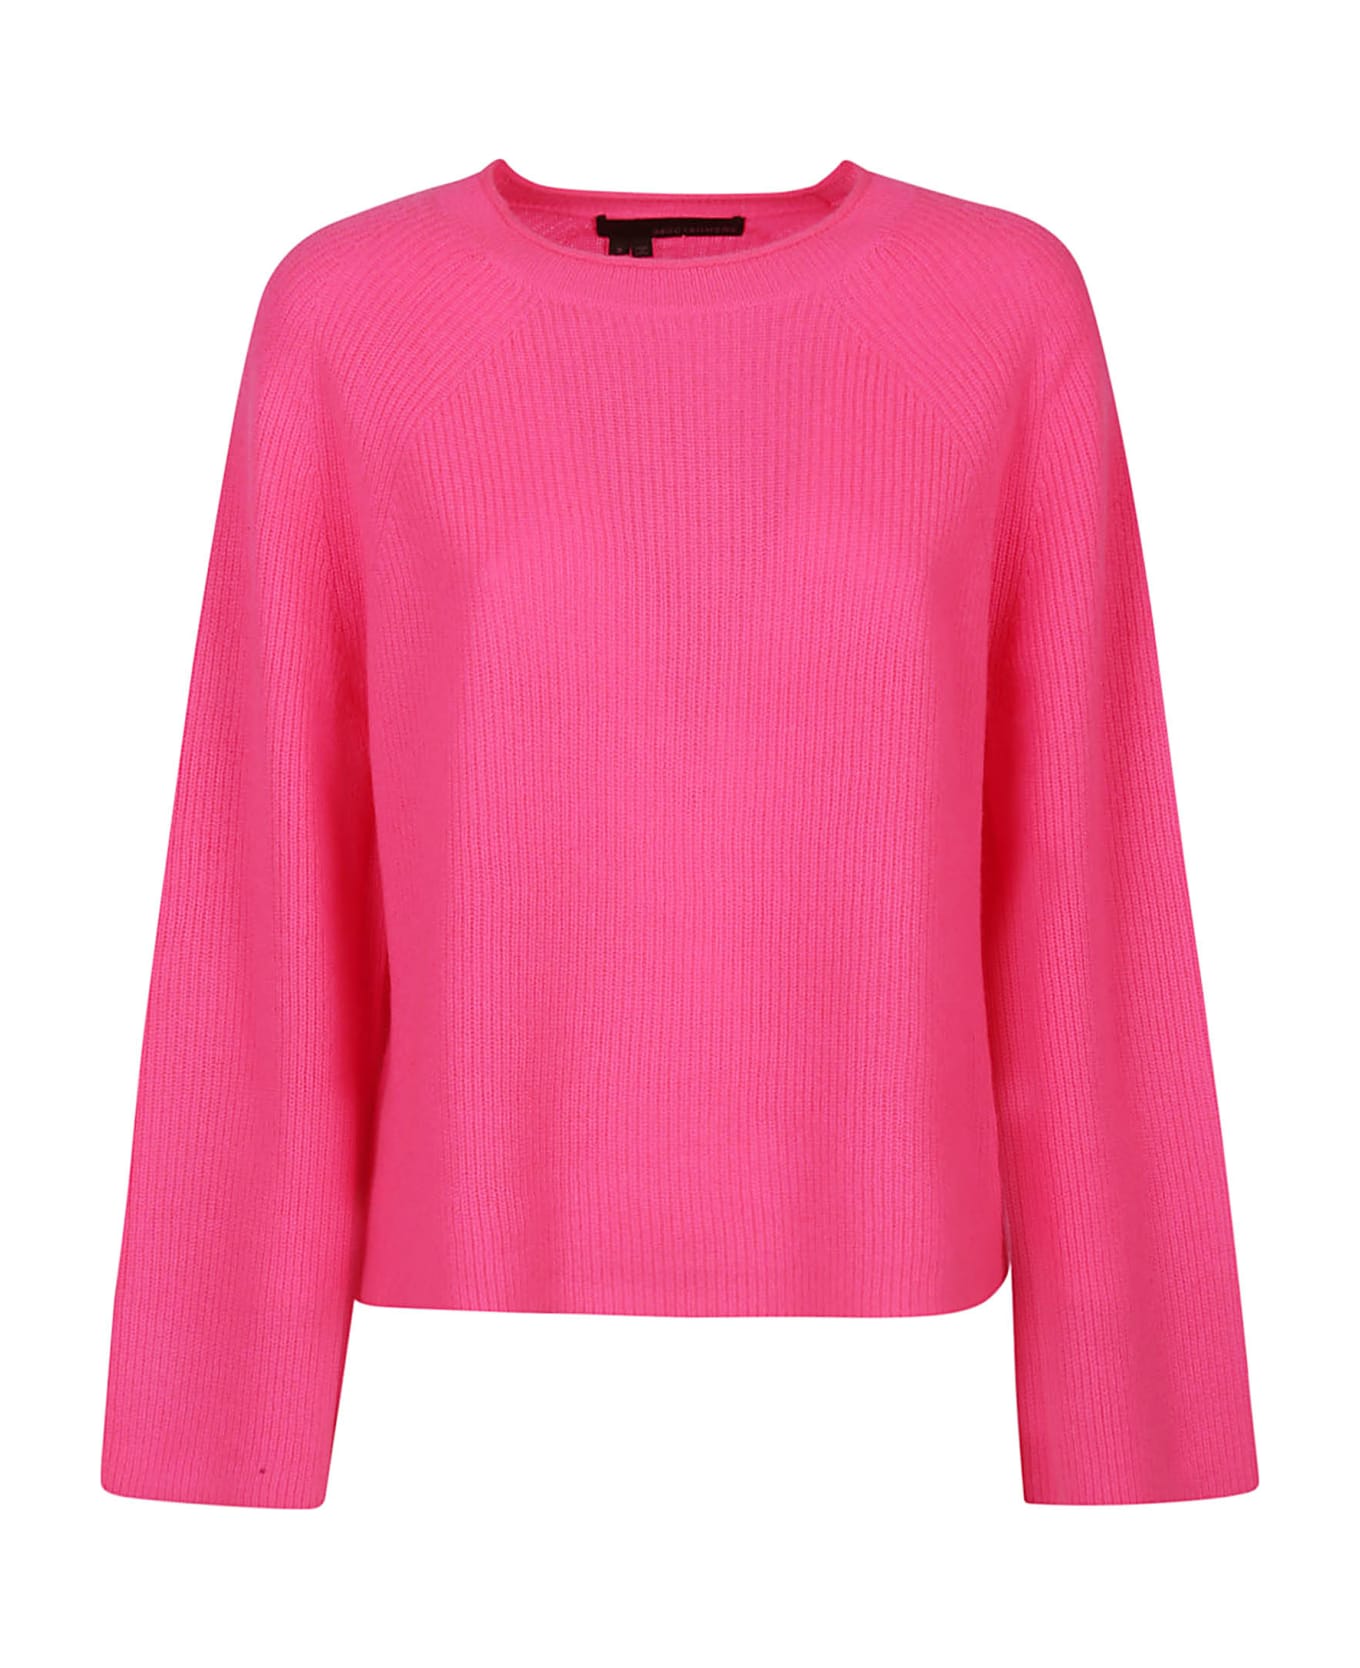 360Cashmere Sophie Trapeze Round Neck Sweater - Day Glo ニットウェア